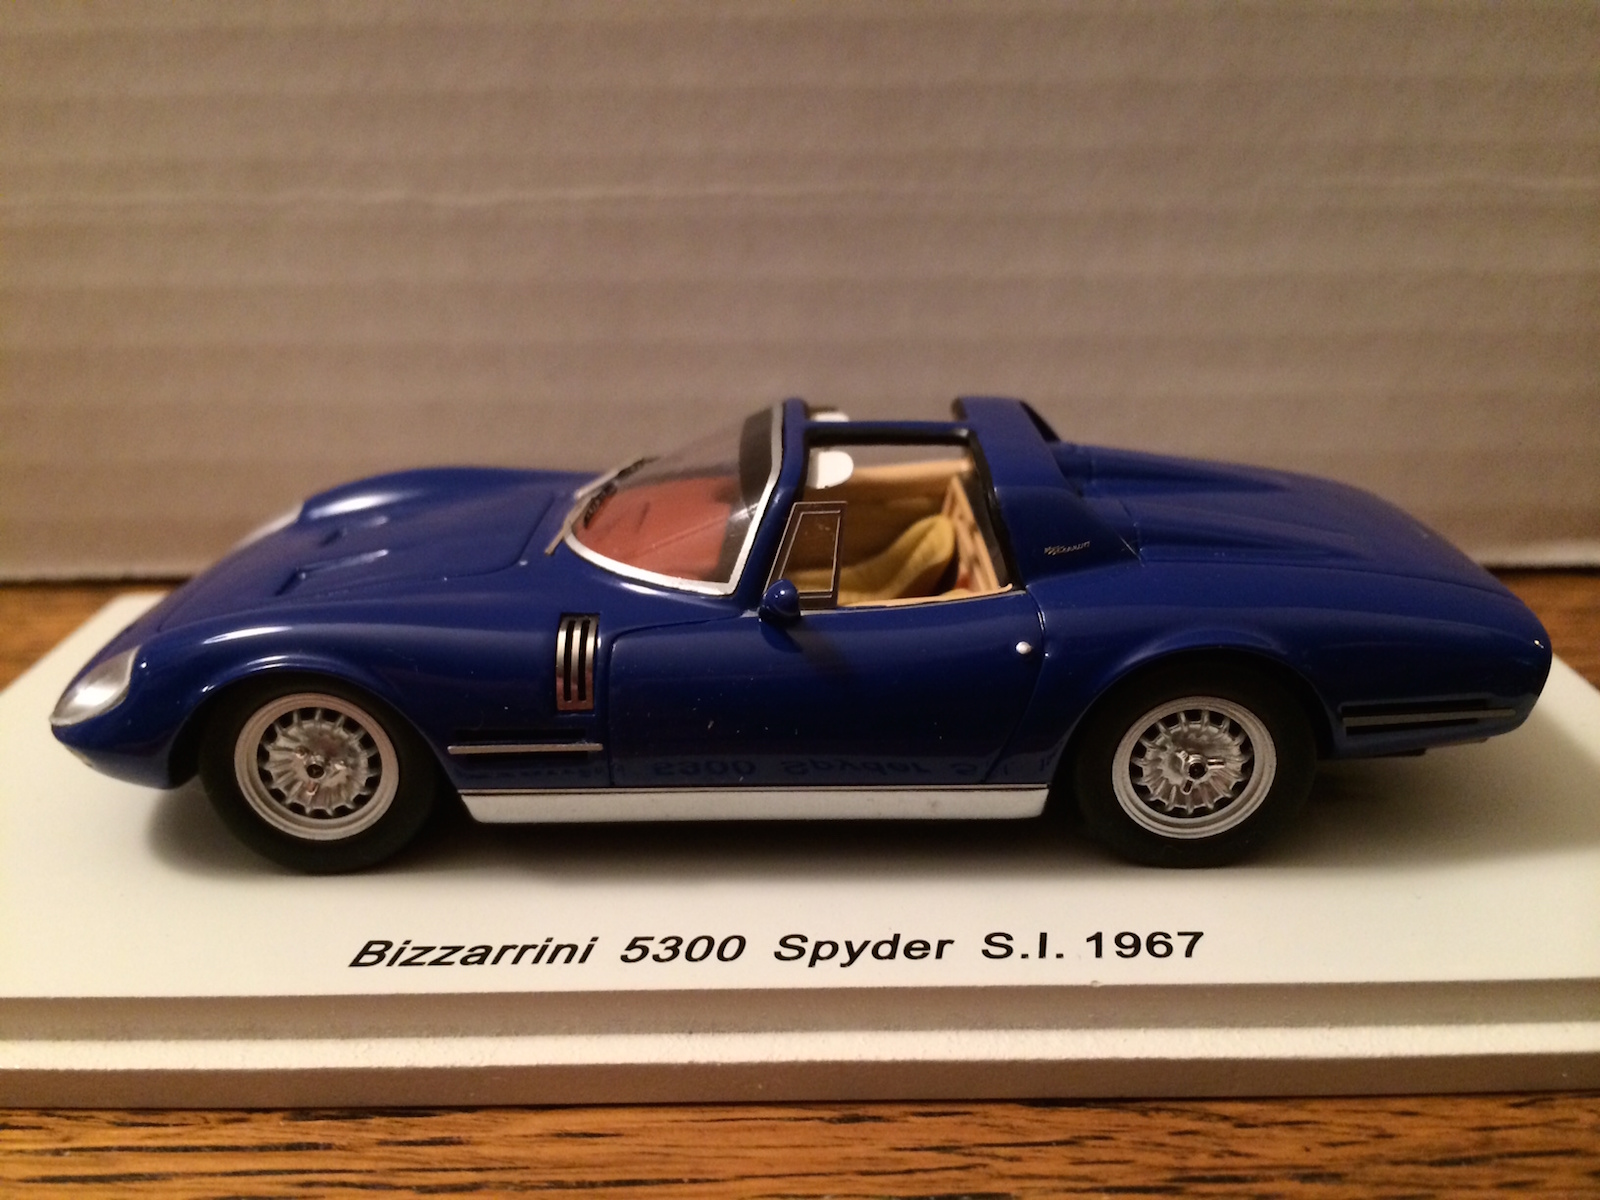 More About The Three Bizzarrini Spyders